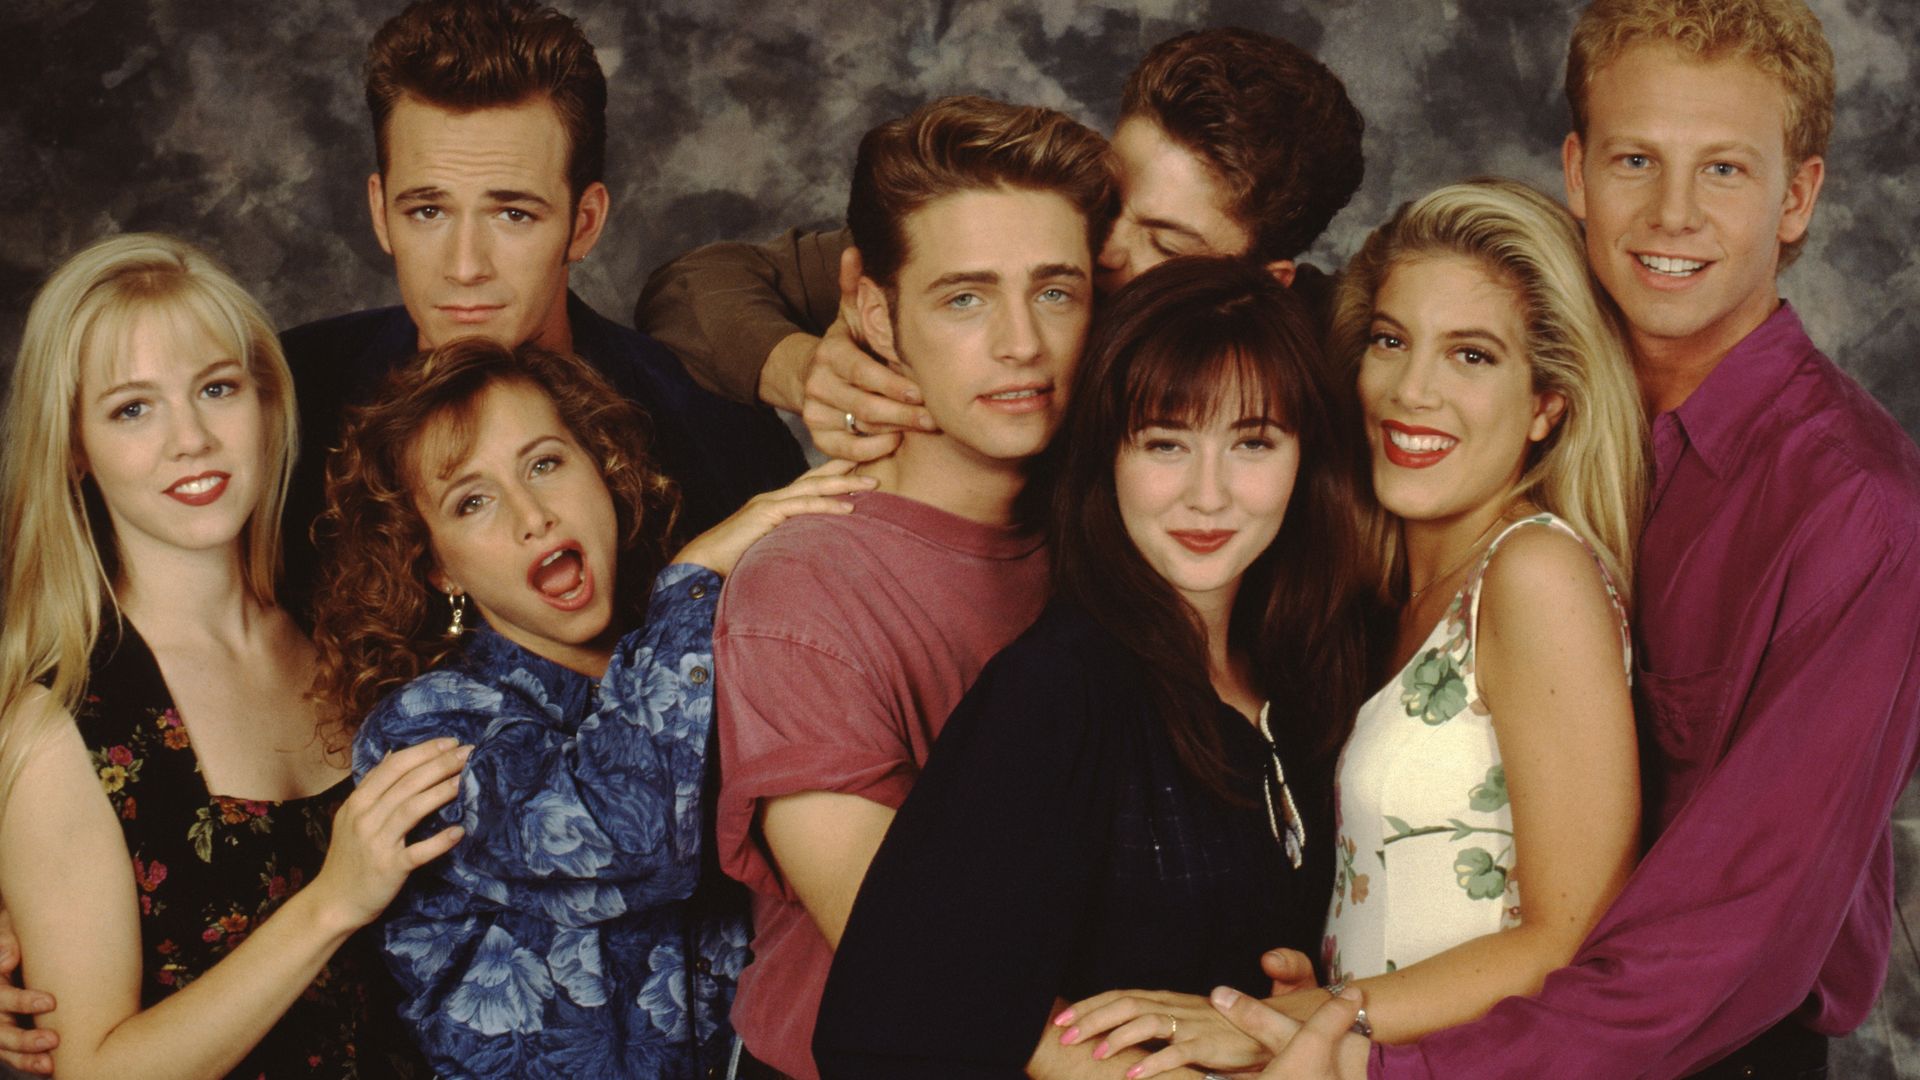 The Beverly Hills, 90210 cast poses for a portrait on set, September 1991 in Los Angeles, California. Left to right: Jennie Garth, Gabrielle Carteris, Luke Perry, Jason Priestley, Brian Austin Green, Shannen Doherty, Tori Spelling and Ian Ziering. 